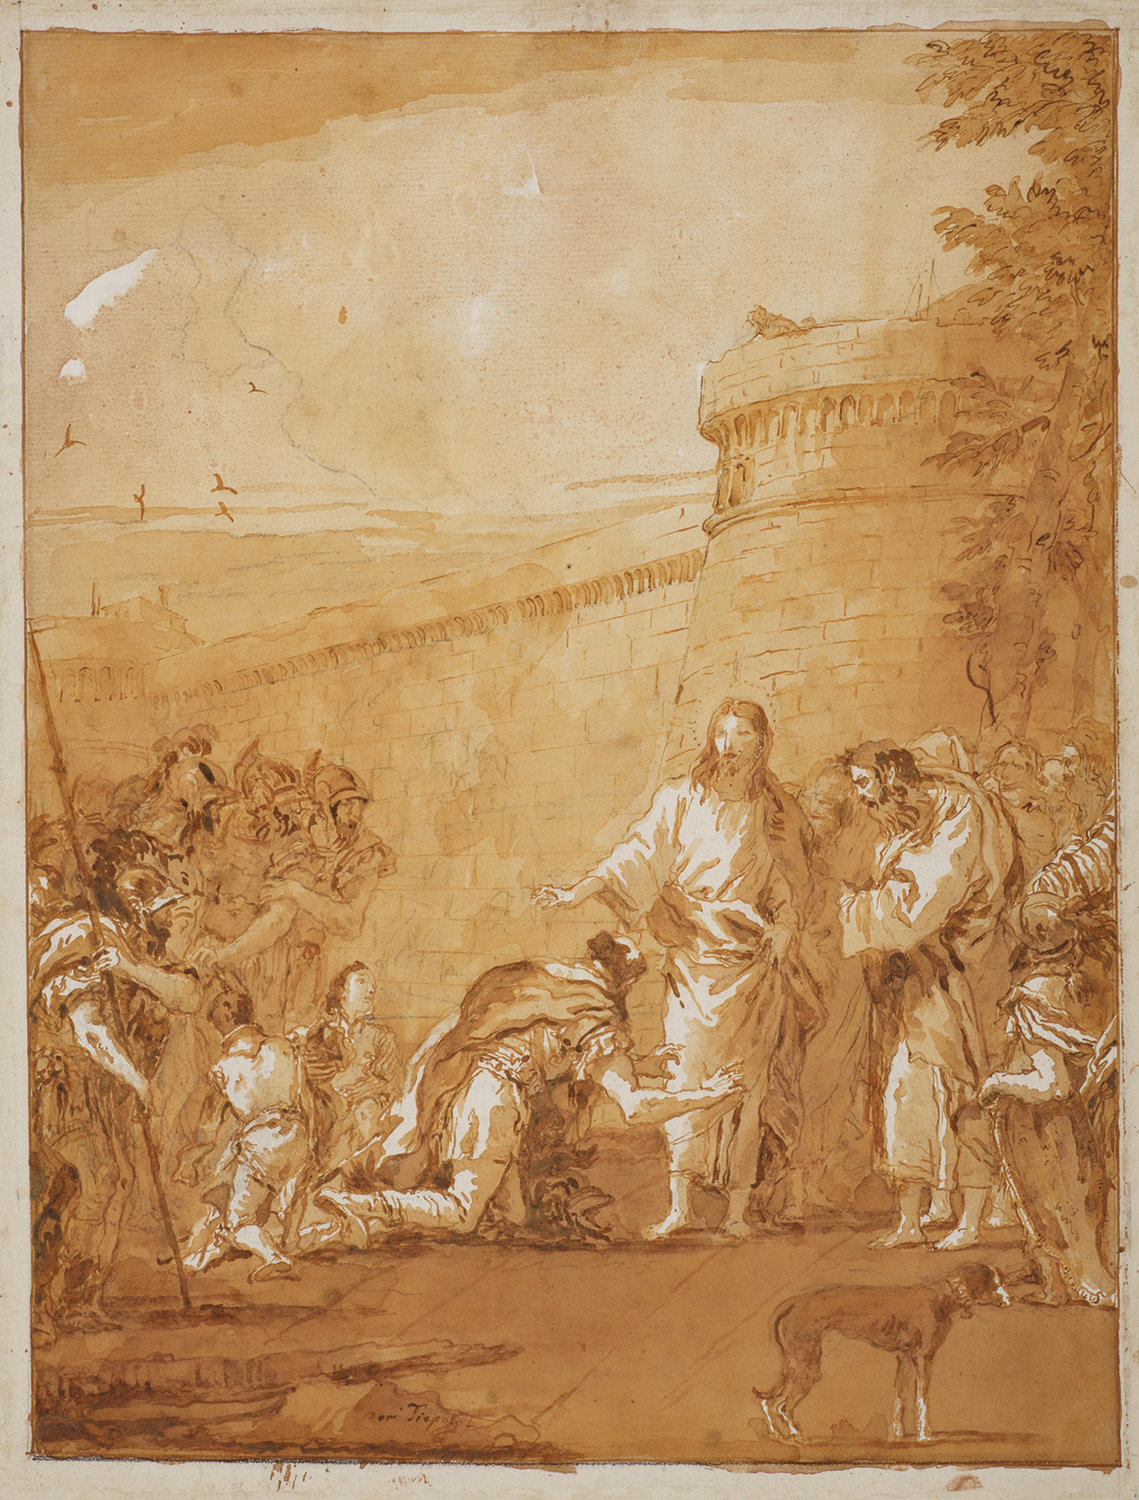 Giandomenico Tiepolo, “Christ and the Centurion of Capernaum,” ca. 1786–90. Pen and brown ink, orange-brown wash, and black chalk over a black chalk underdrawing on off-white laid paper. 19 5/16 x 15 1/8 inches. Promised gift from the Collection of Elizabeth and Jean-Marie Eveillard.